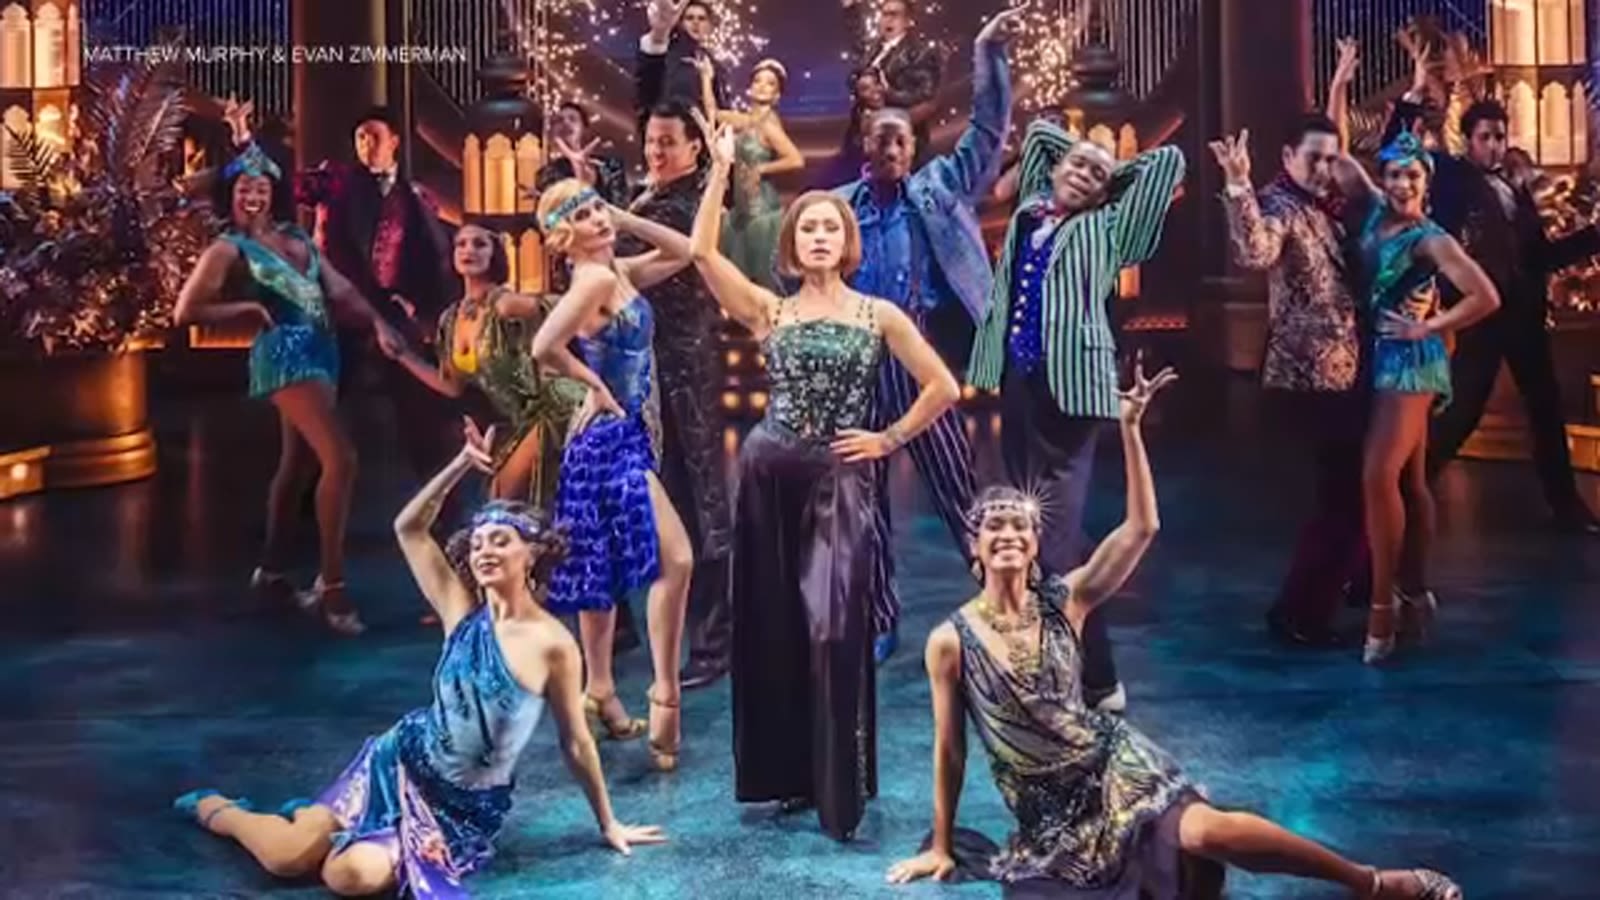 Samantha Pauly talks about starring as Jordan Baker in 'The Great Gatsby' on Broadway